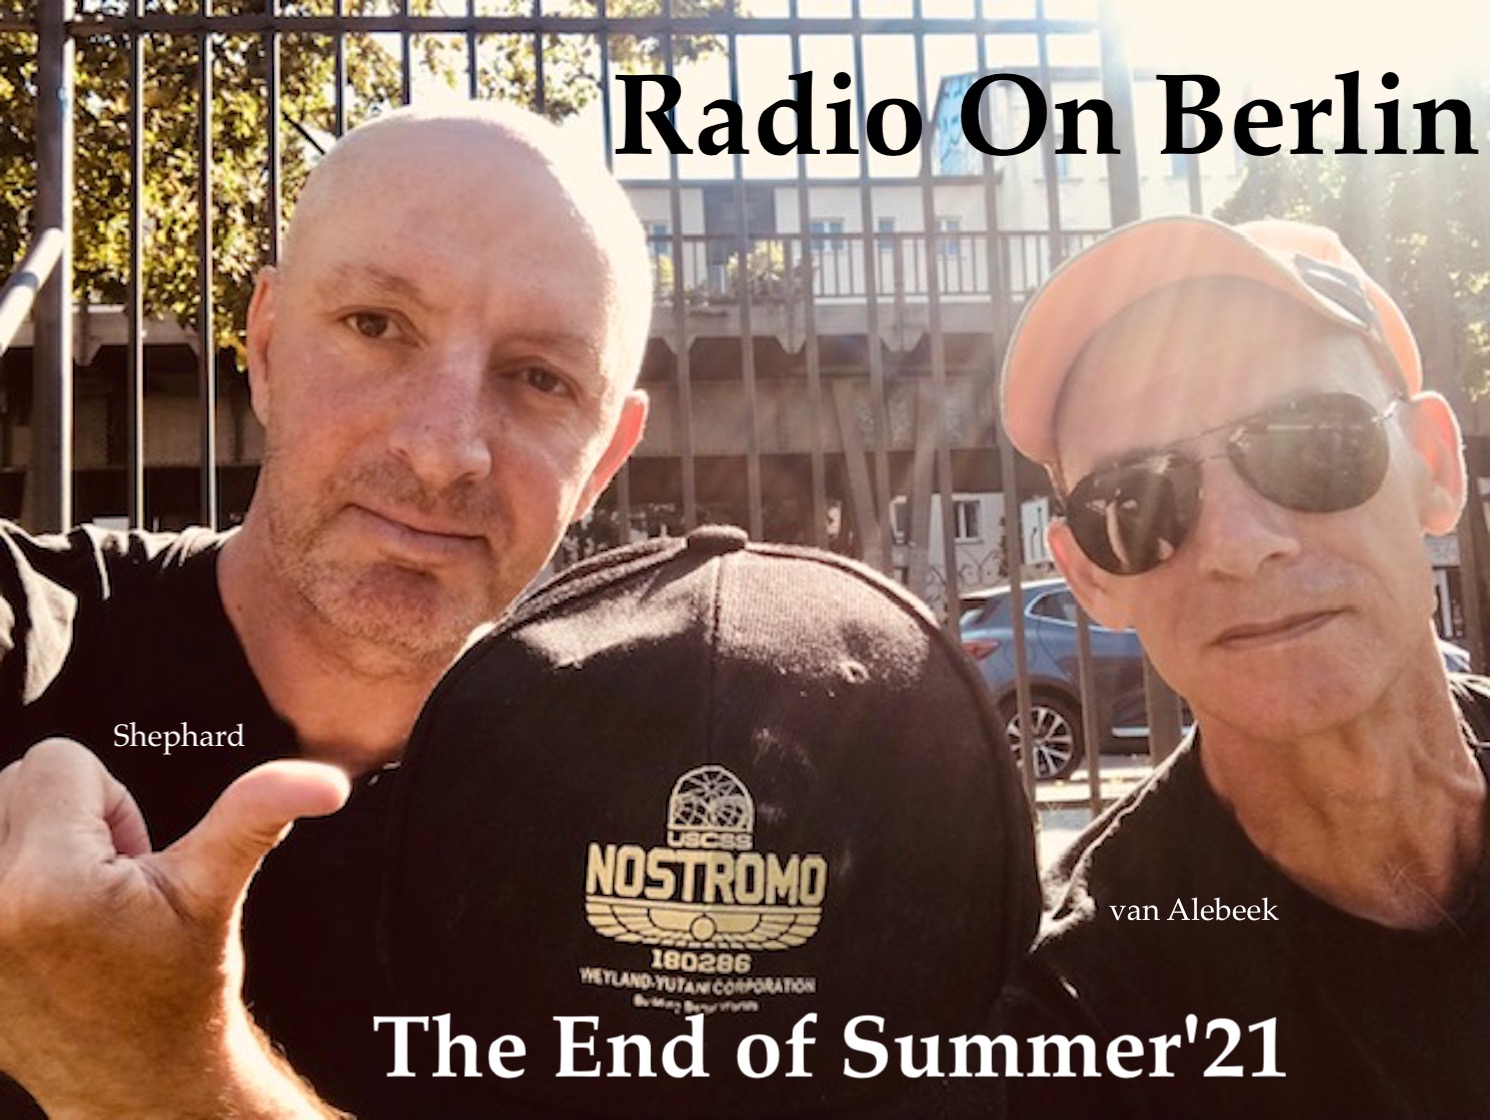 Radio On Berlin – The end of summer’21